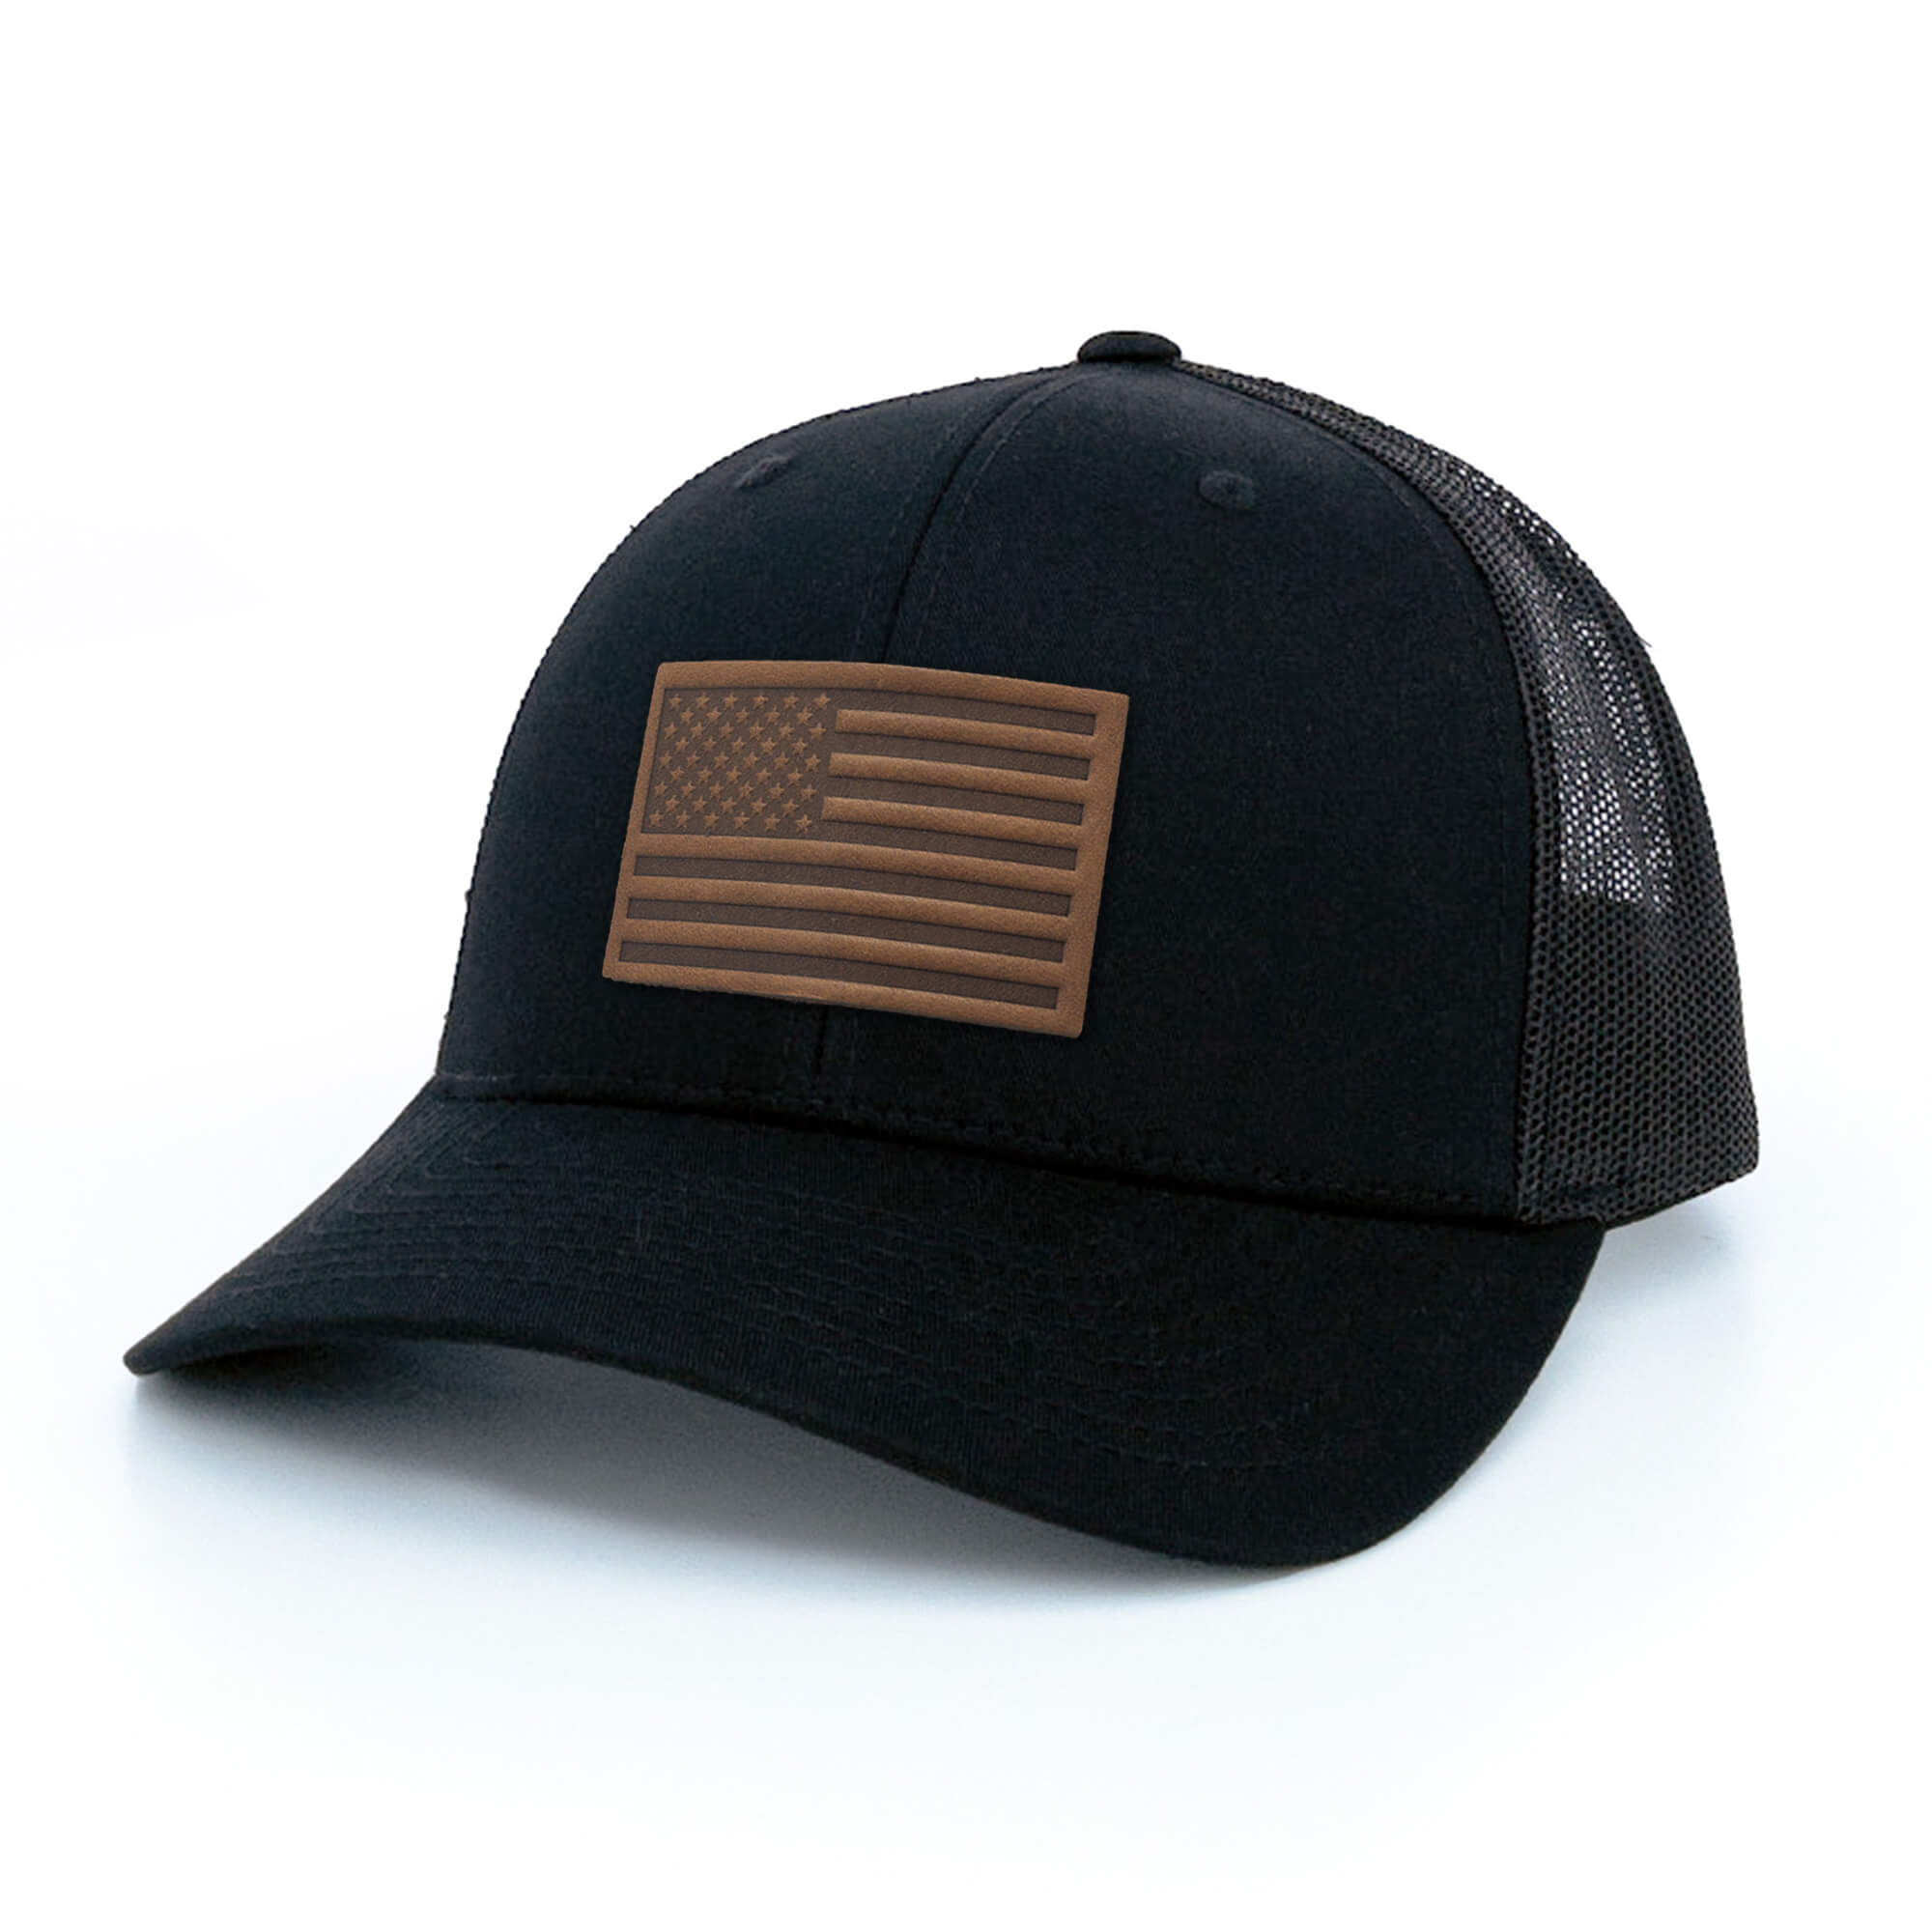 Areola - Leather Hashtag Black Patch Engraved Trucker Hat, Black